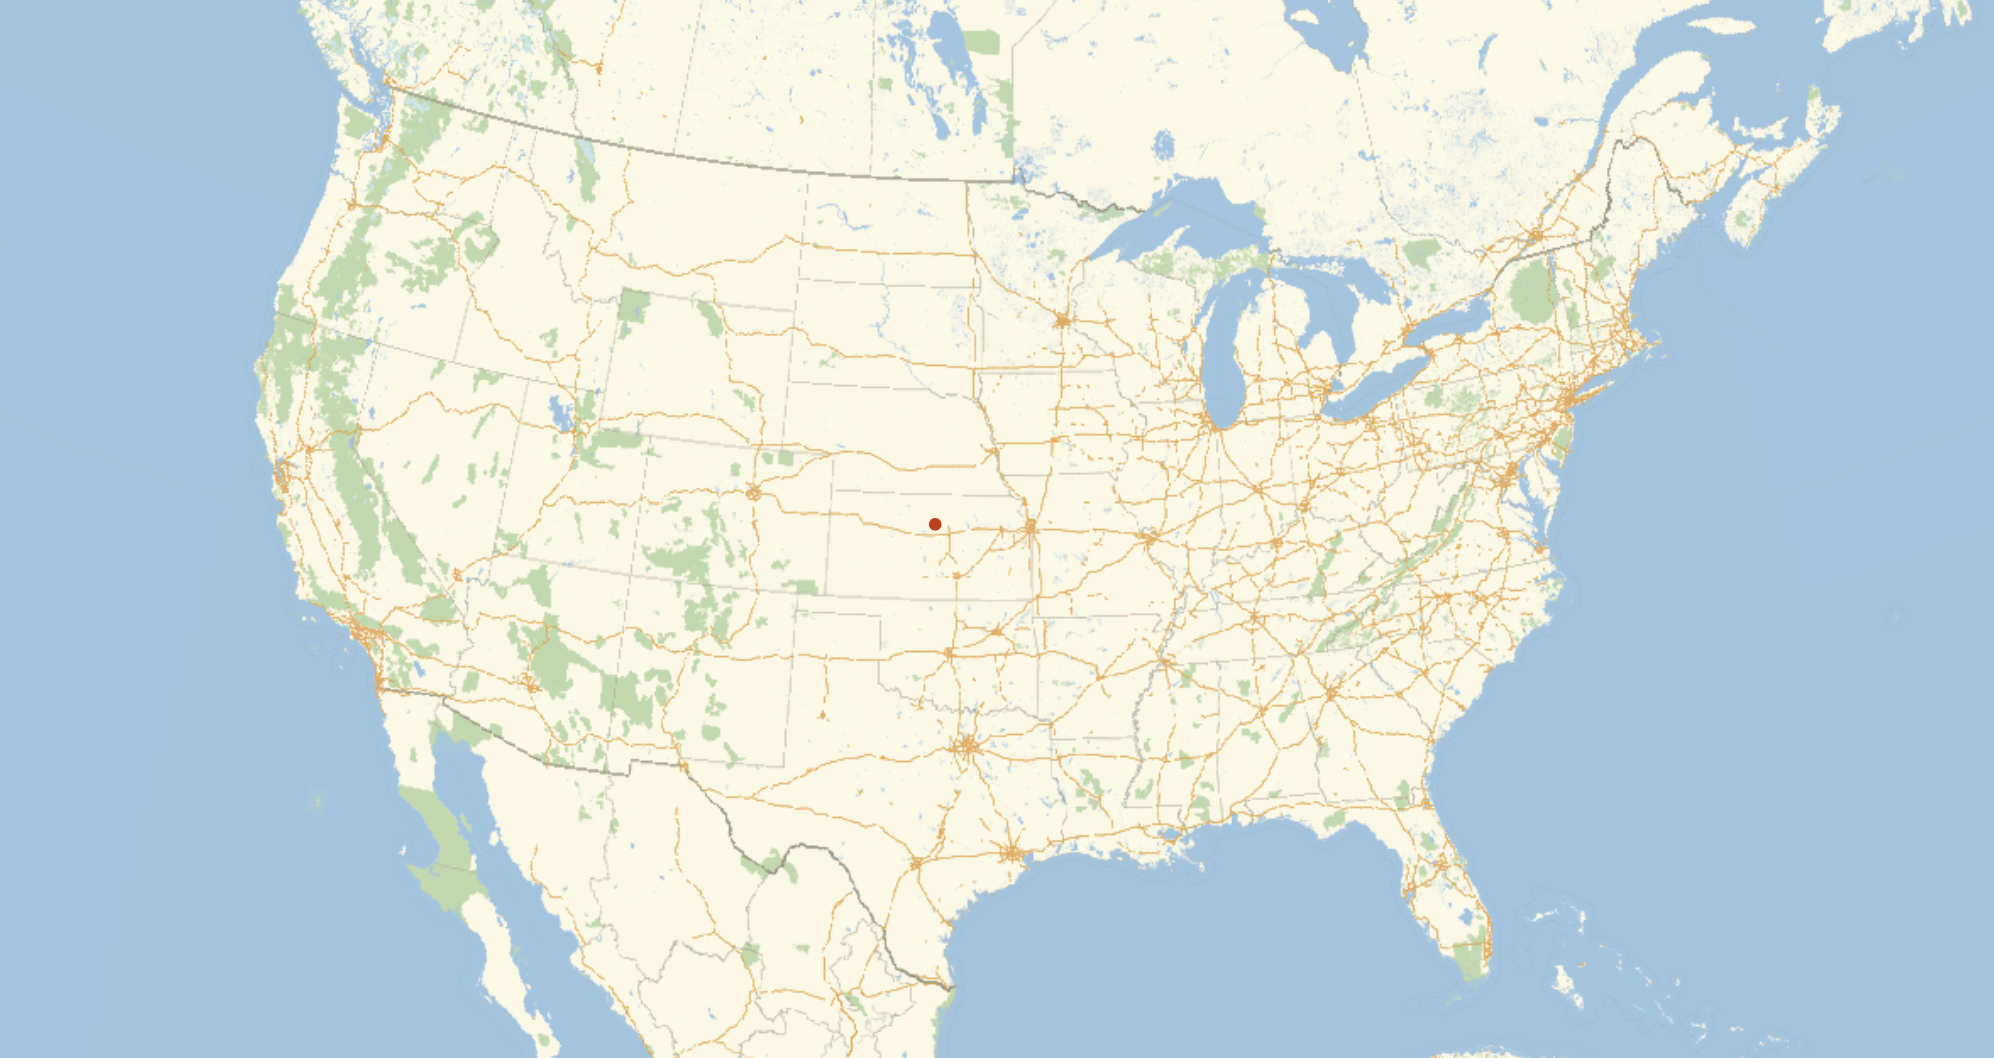 the point farthest from the borders of the conterminous US